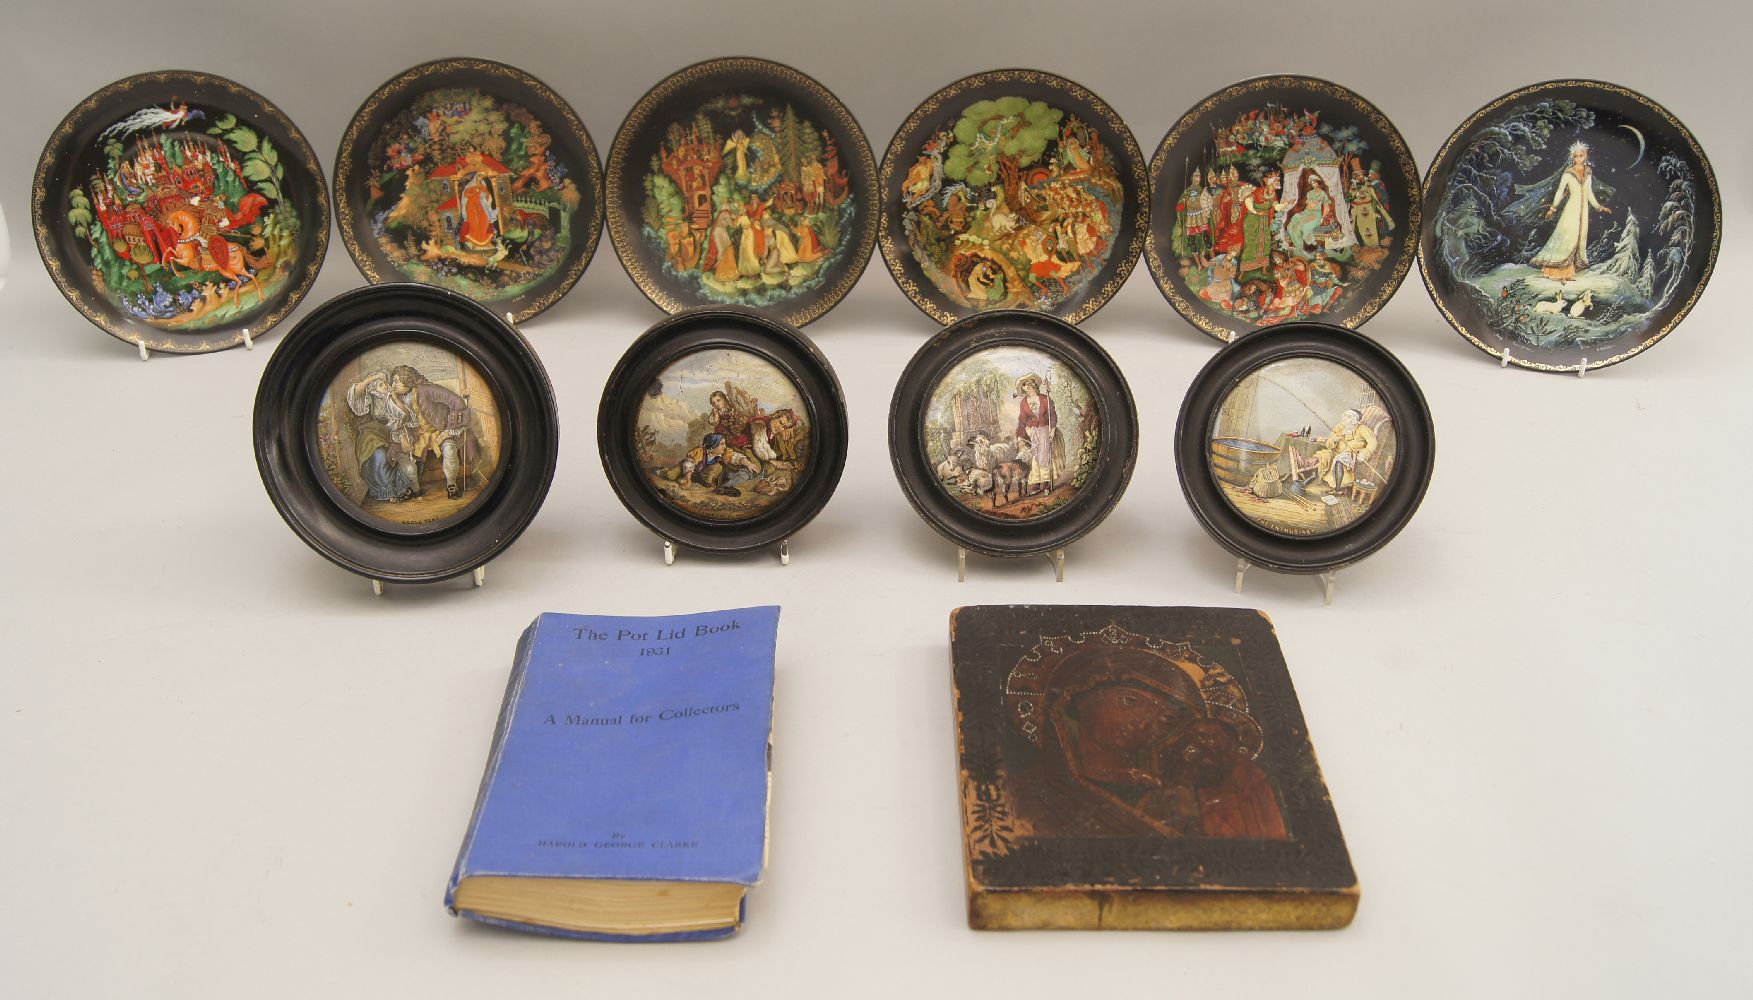 A collection of titled Prattware pot lids, 19th century, to comprise, Charity, Leid a Dite, A - Image 2 of 2